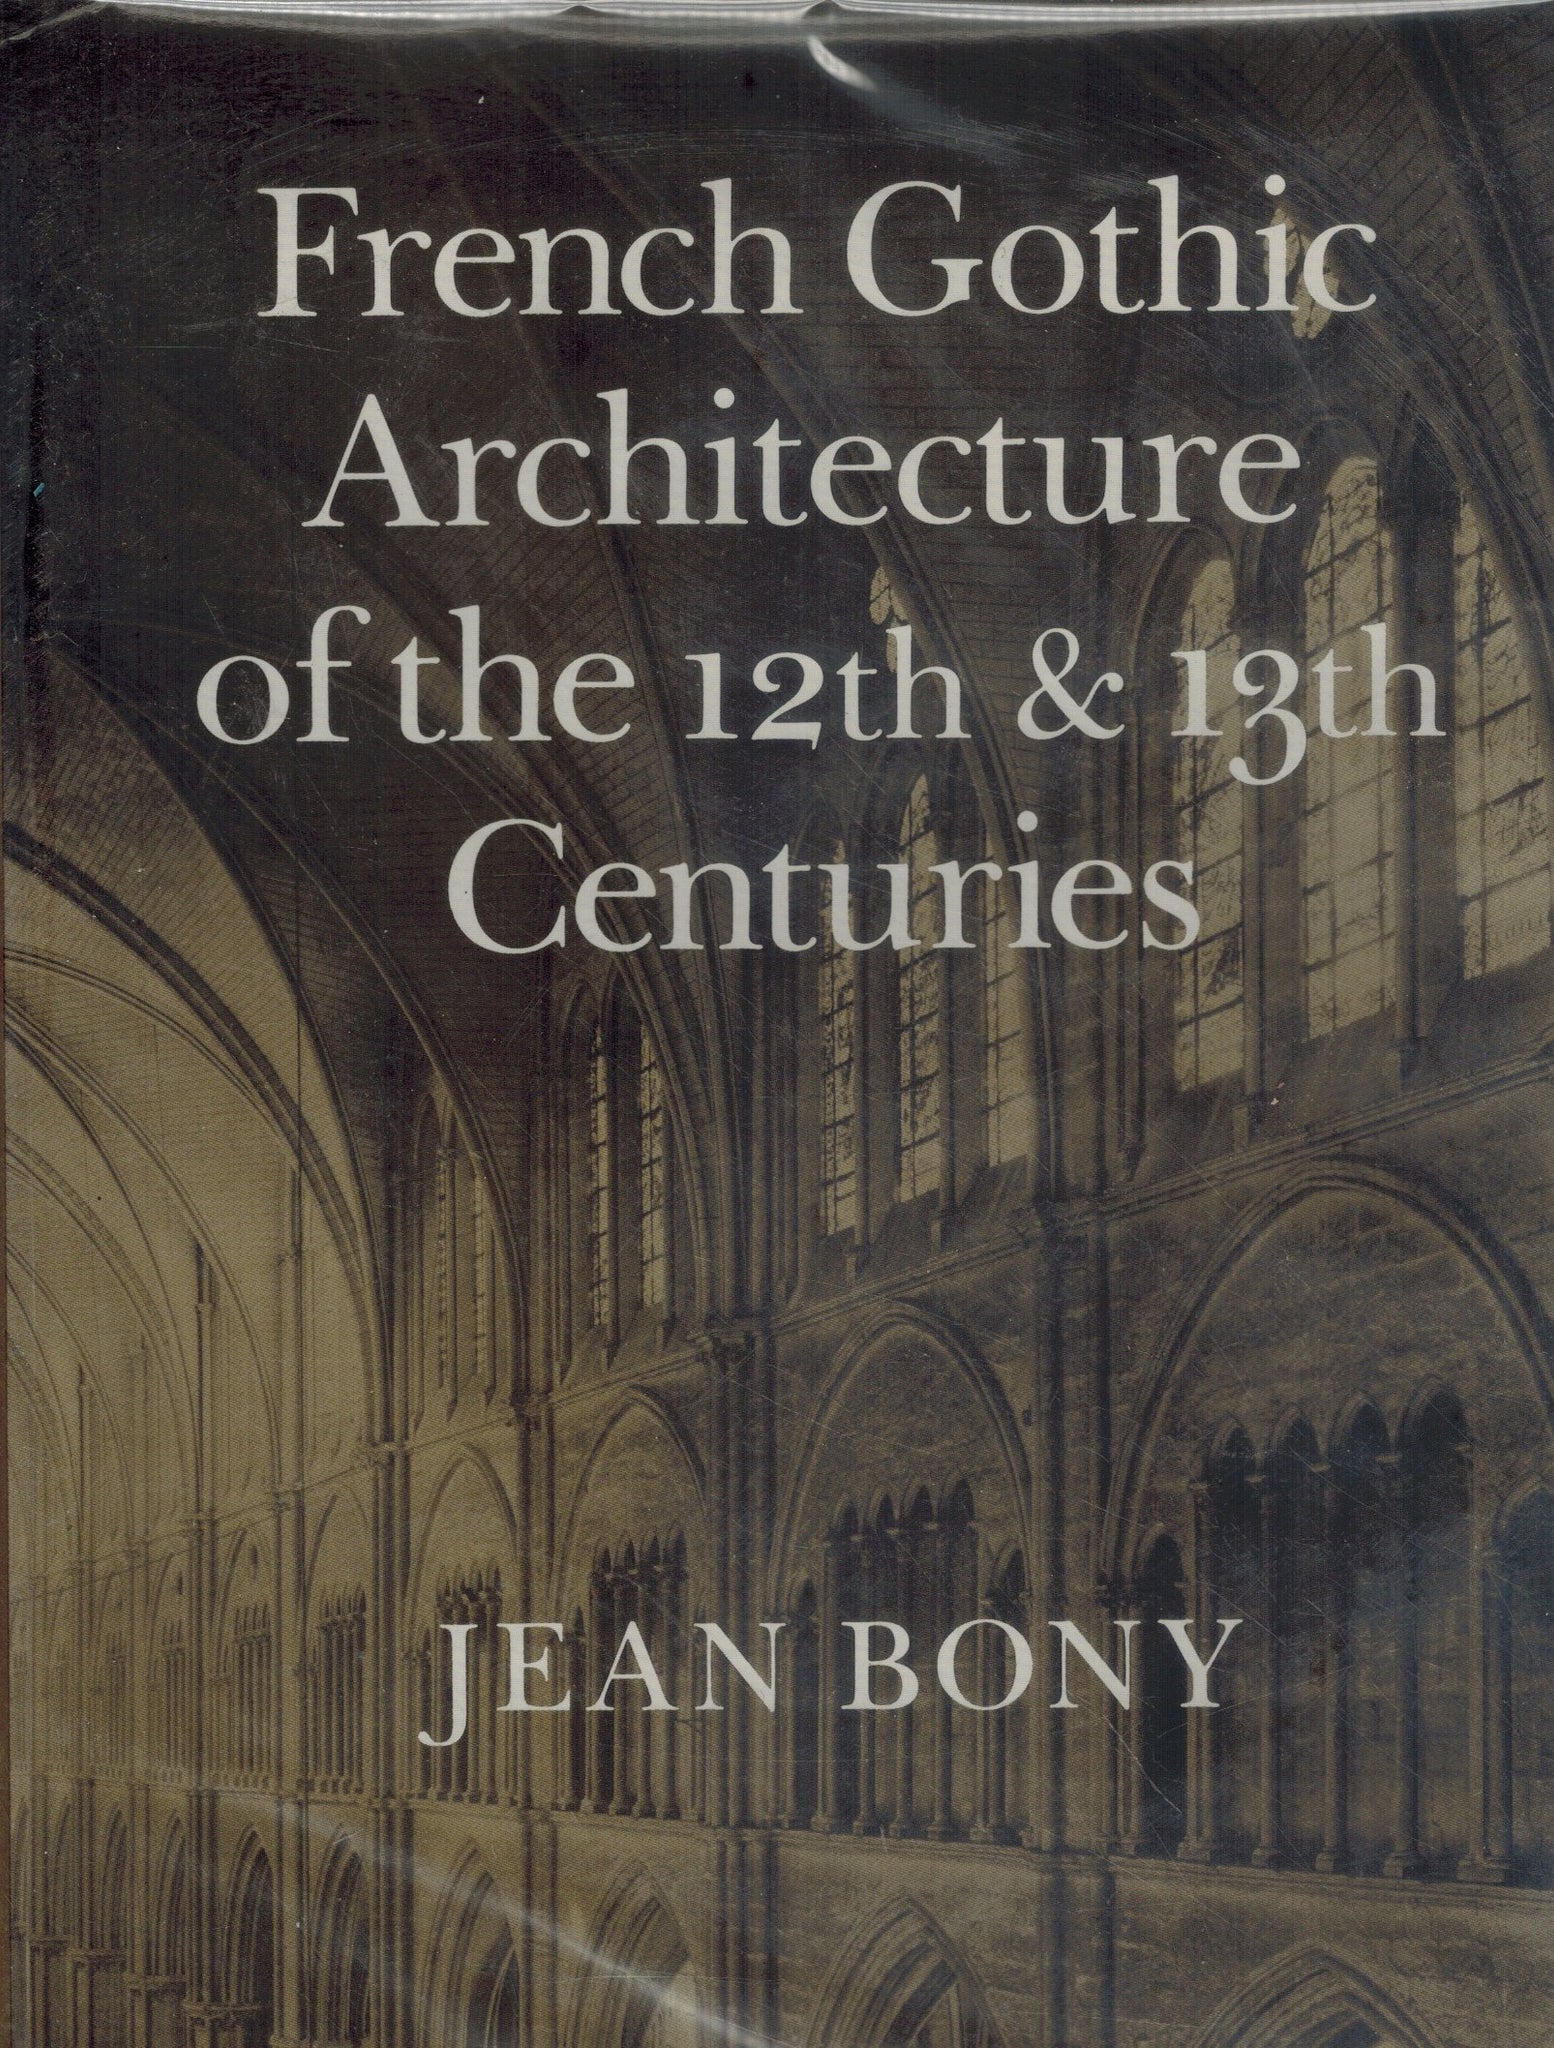 French Gothic architecture of the 12th and 13th centuries  by Bony, Jean